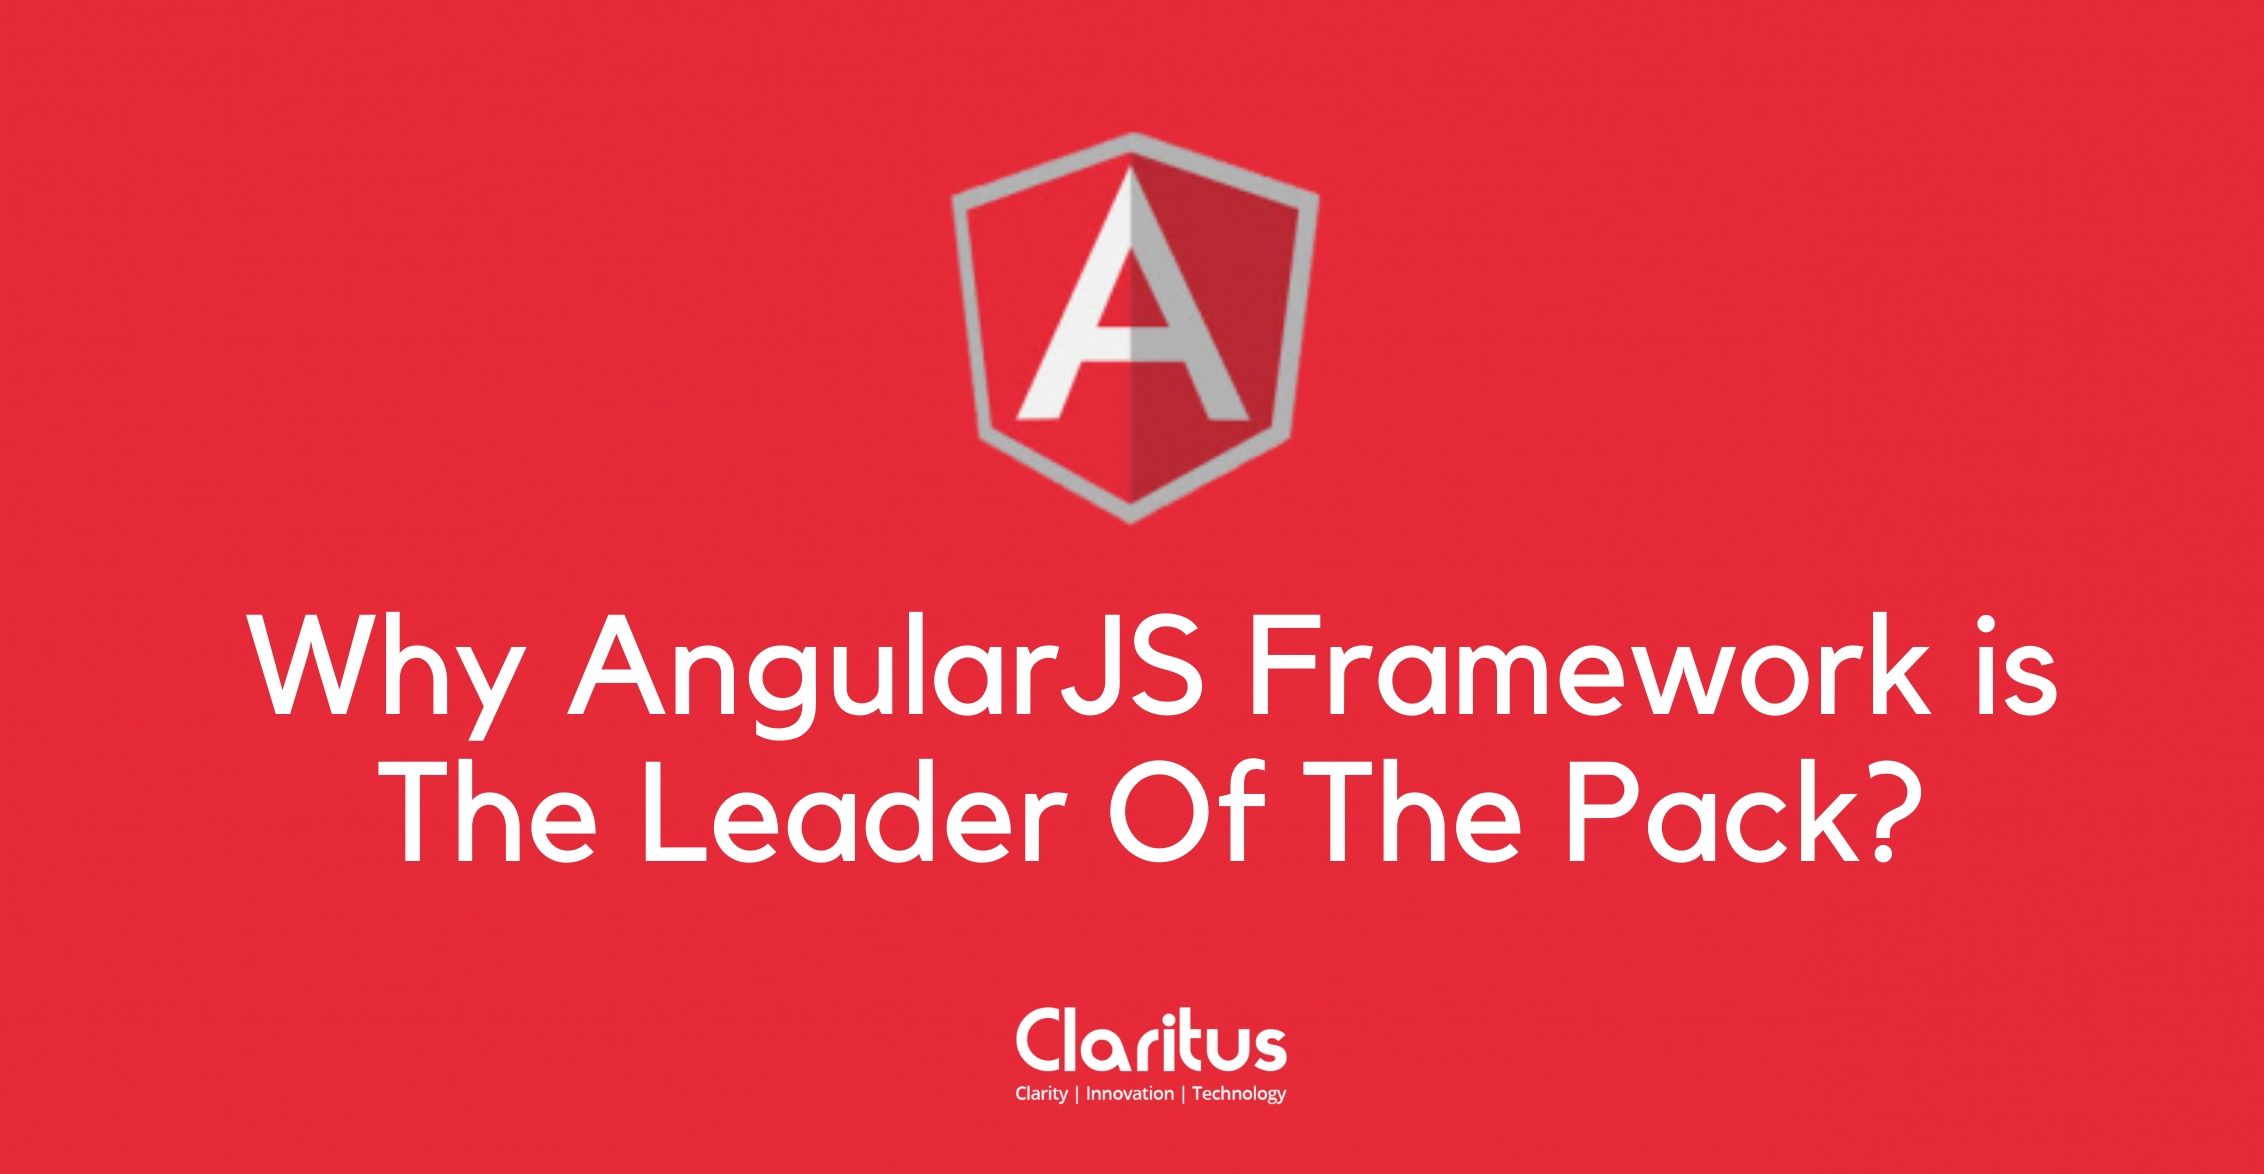 Why AngularJS Framework is The Leader Of The Pack